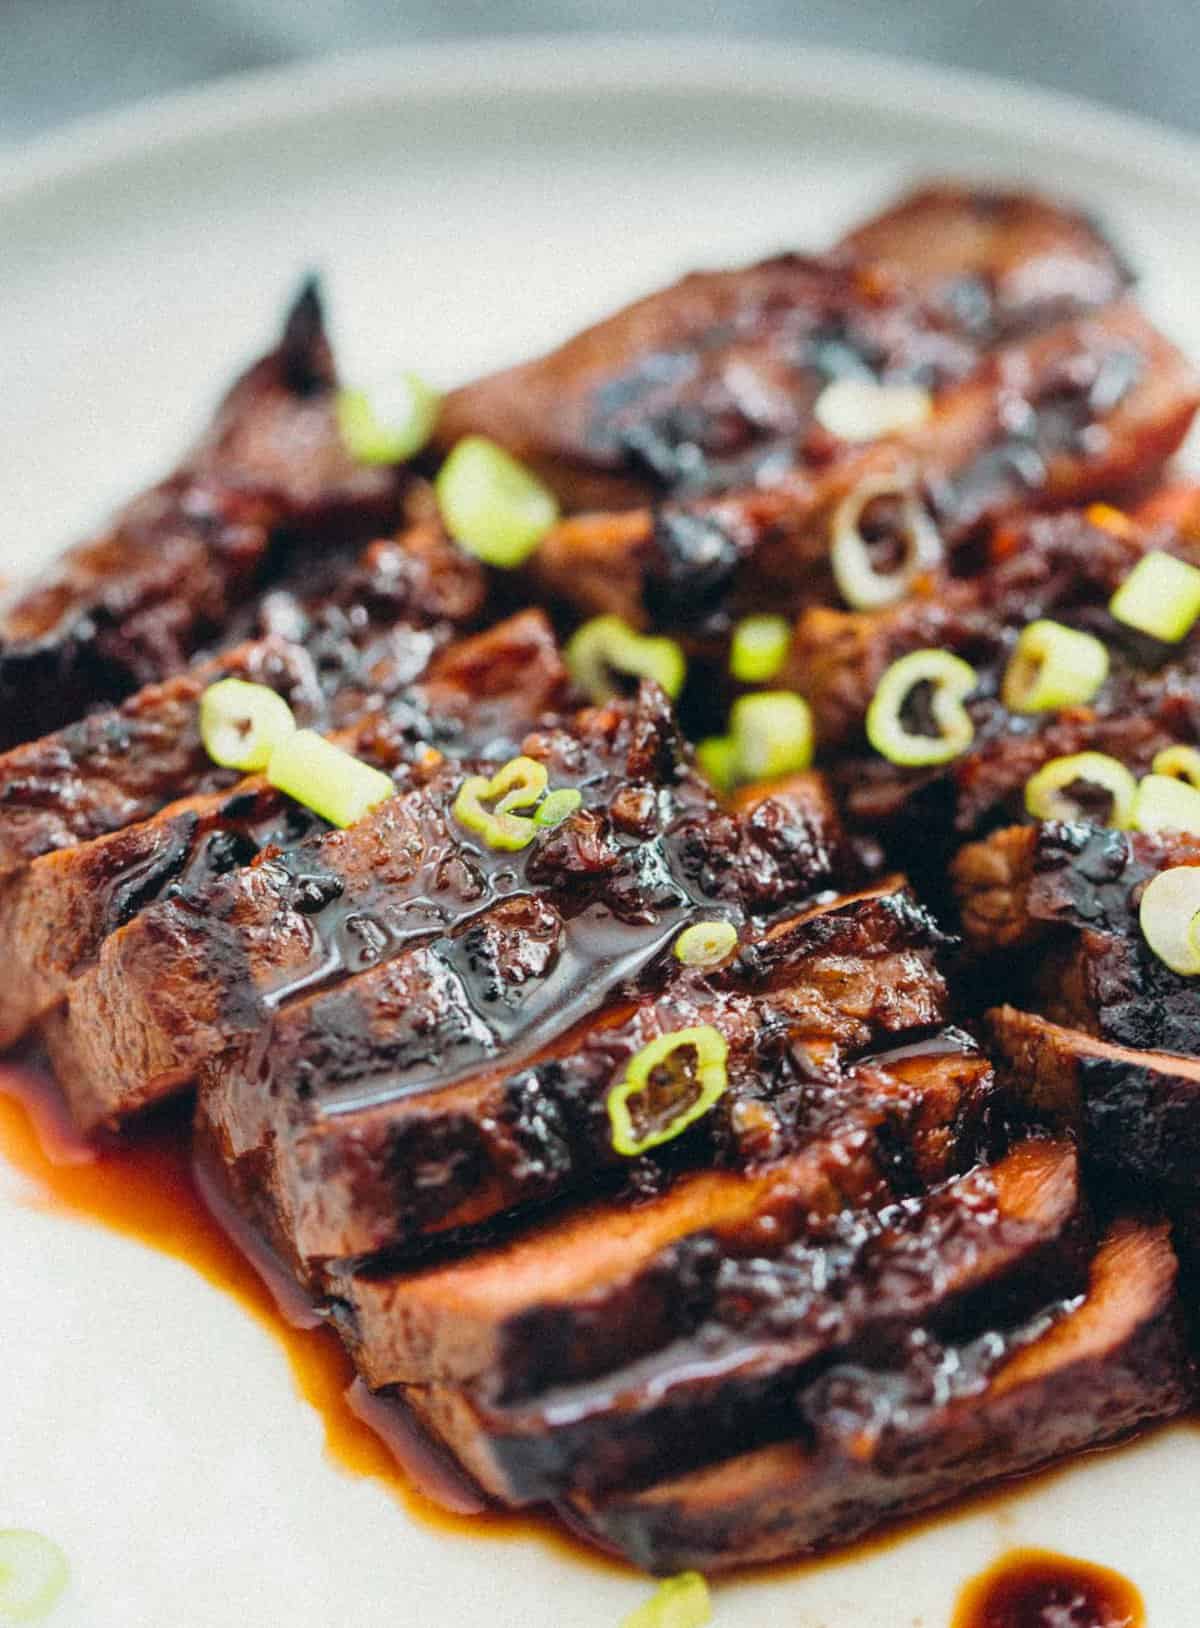 This grilled Asian marinated flat iron steak is a quick weeknight meal when you're looking to change up traditional grilled steak! #grilling #steak #flatironsteak #asianmarinade